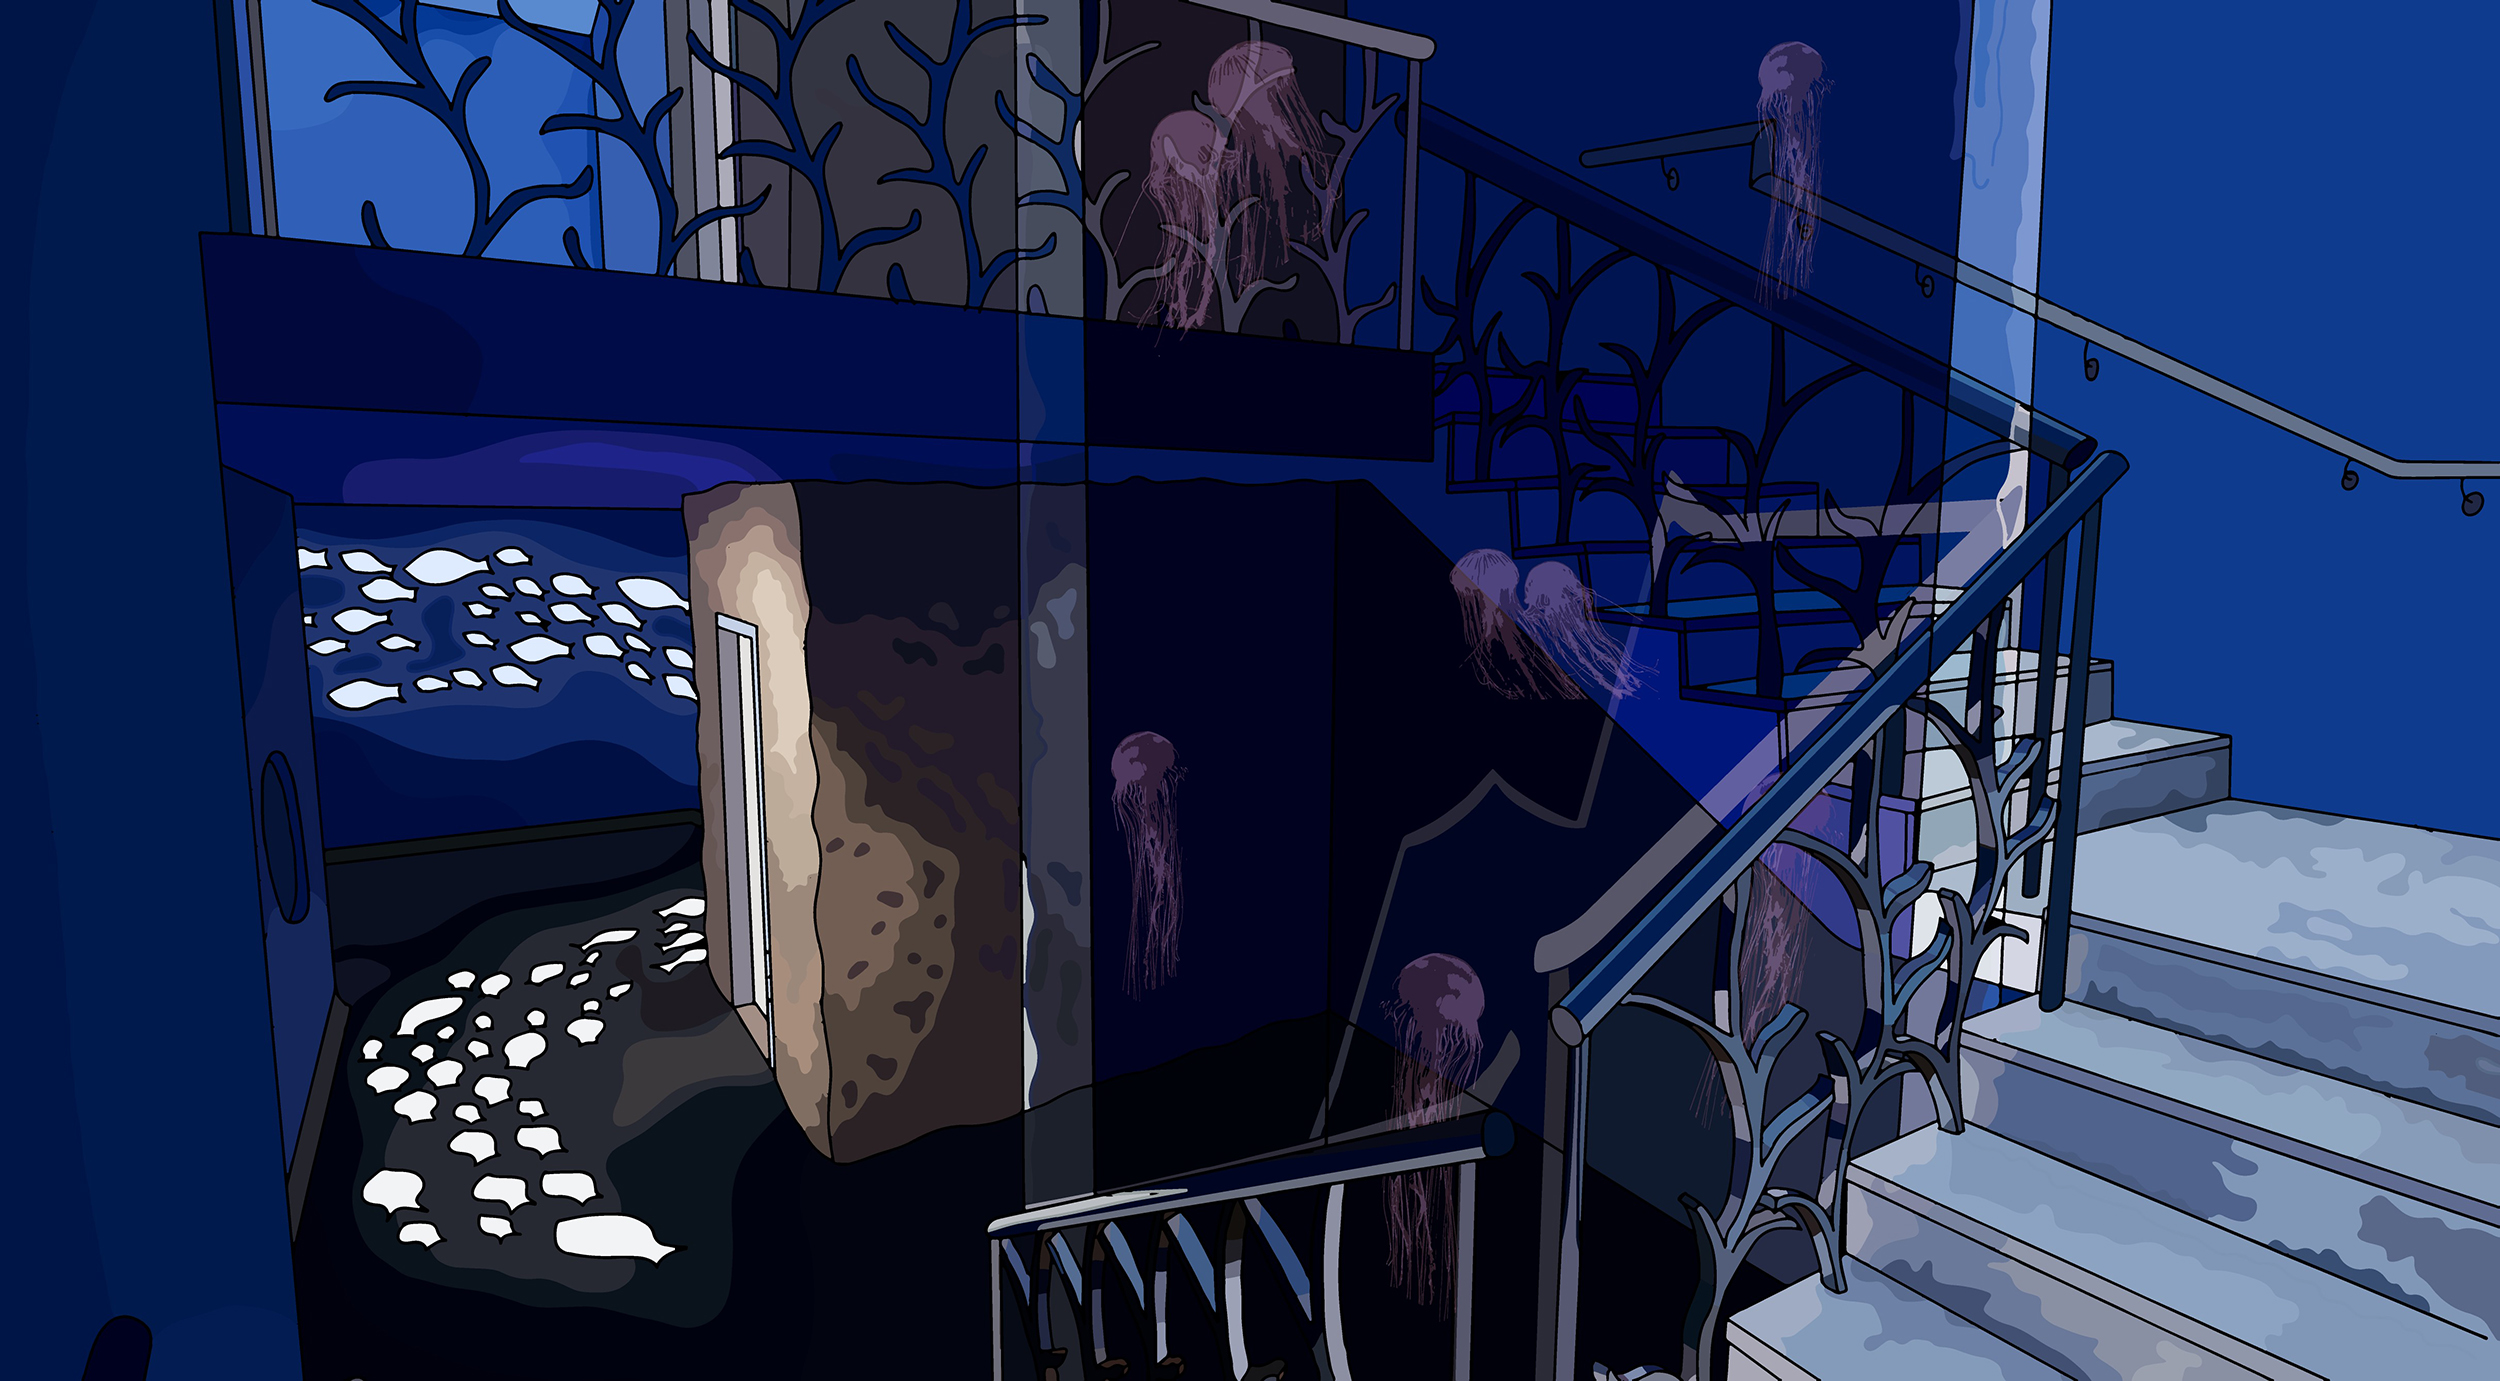 Render in illustrative style showing a centre tank spanning two floors with jellyfish surrounded by staircase.